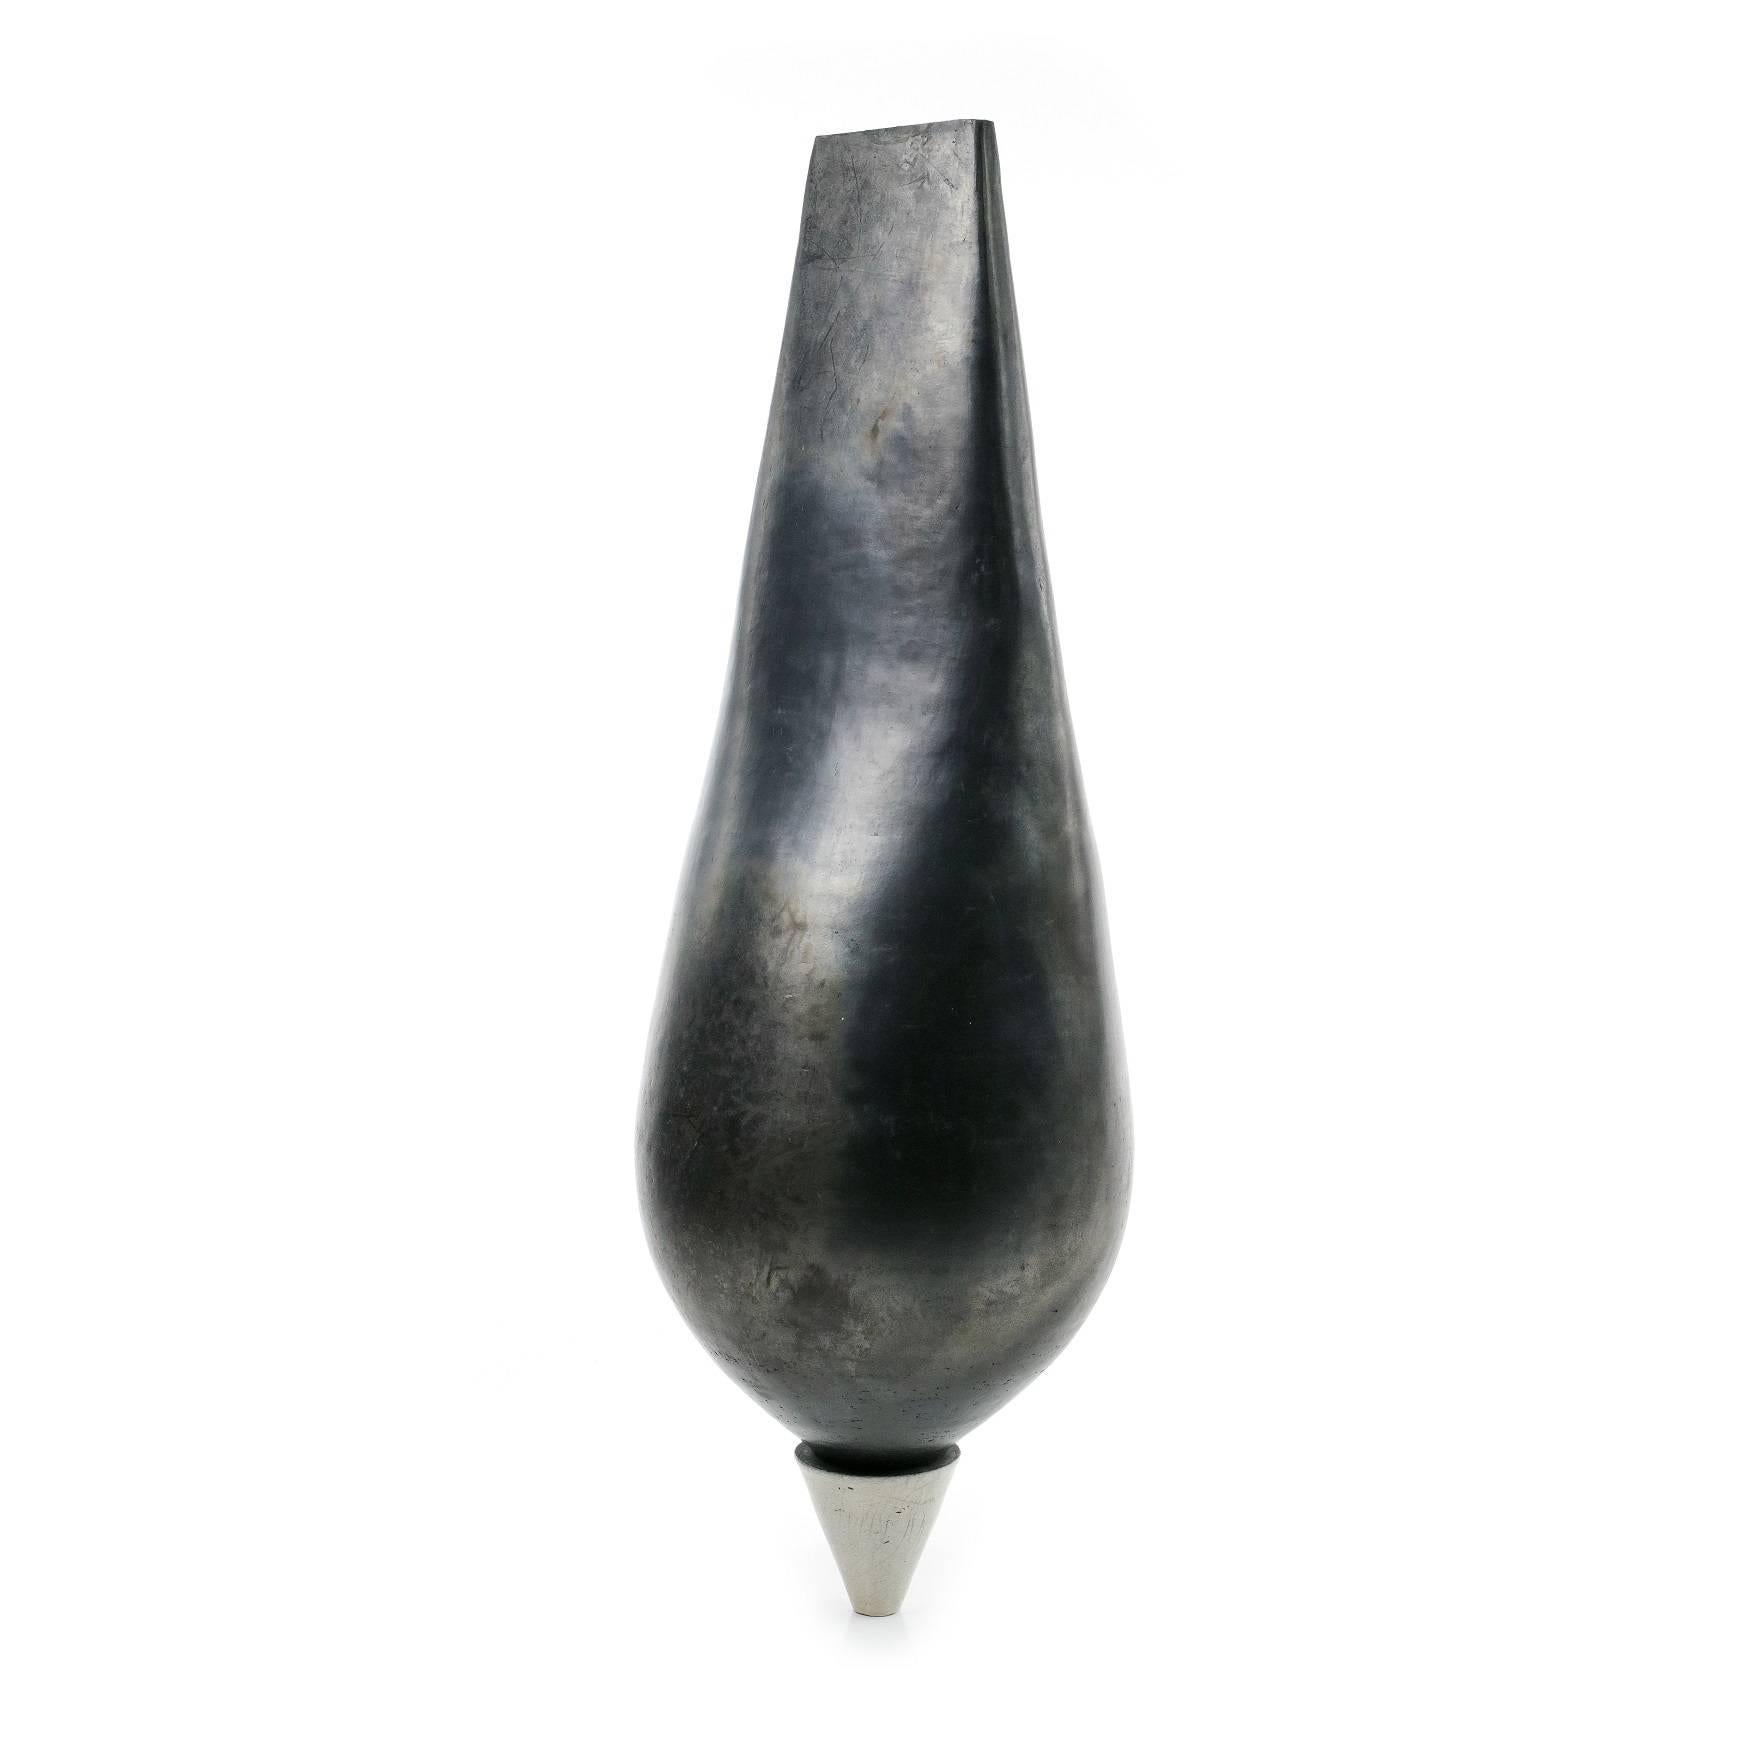 Naos is a unique ceramic sculpture by contemporary artist Tien Wen, dimensions are 68 × 25 × 23 cm (26.8 × 9.8 × 9.1 in). 
The sculpture is signed and comes with a certificate of authenticity.

The sculpture has a metallic quality that is similar to